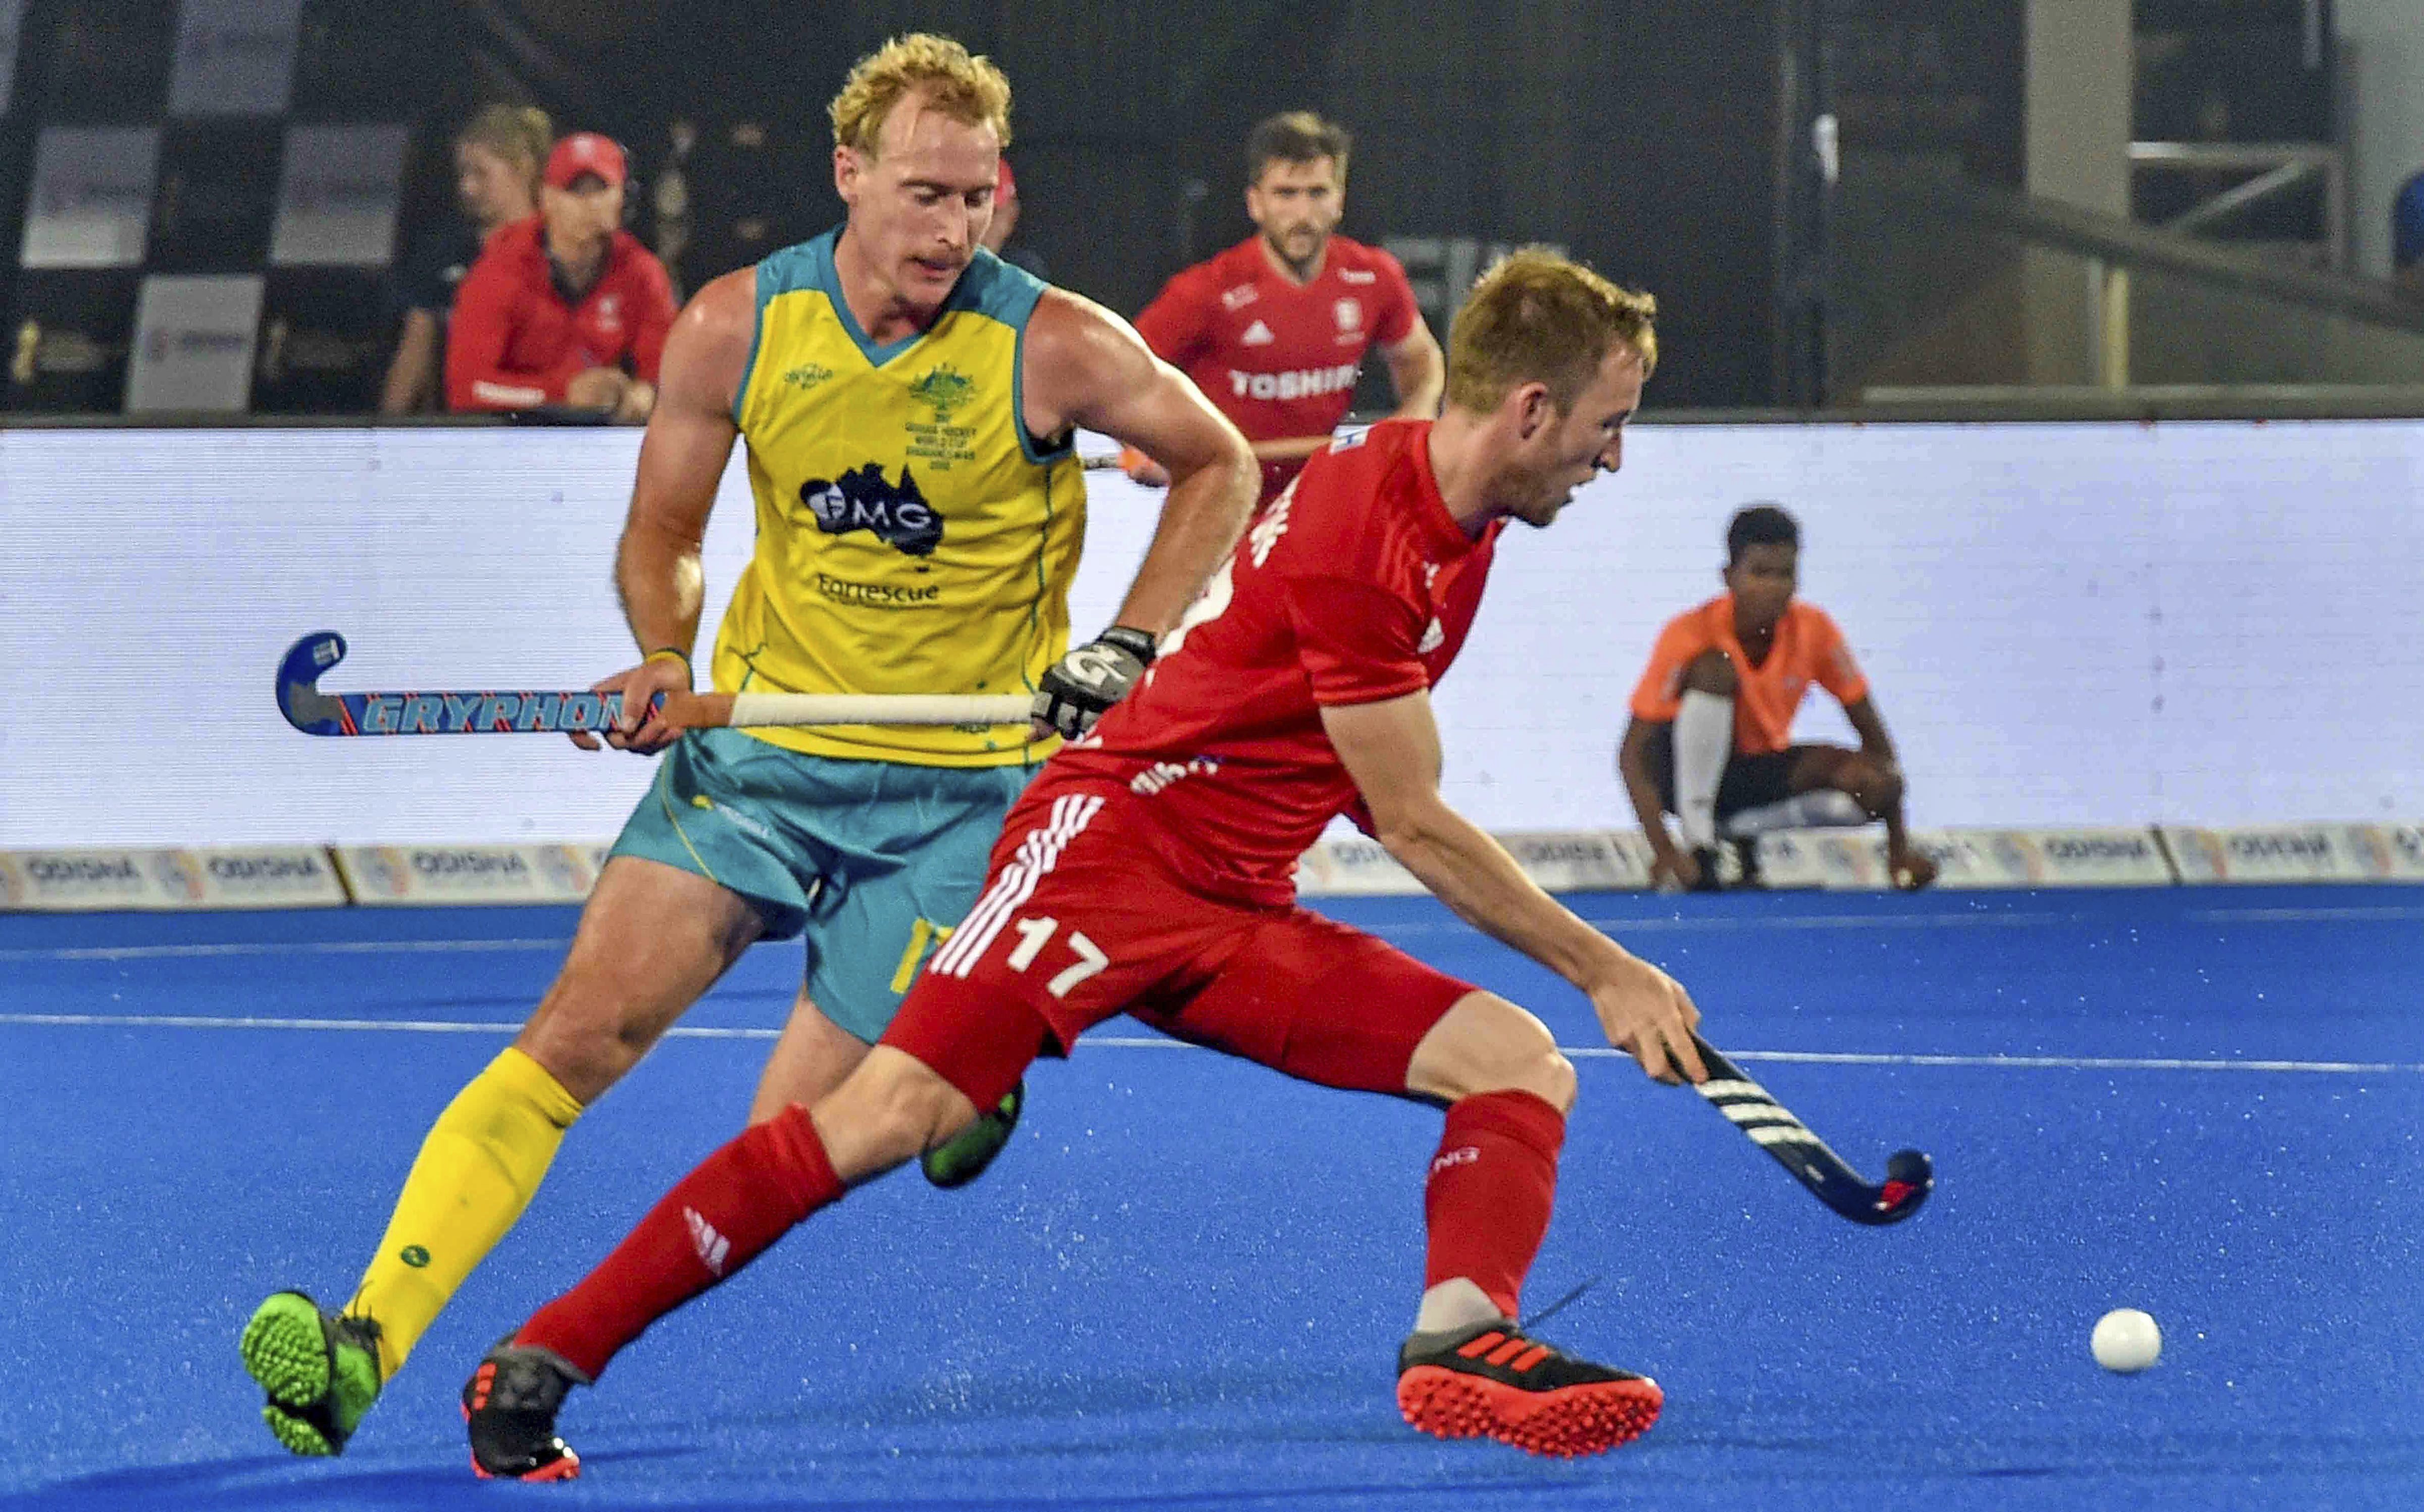 Australia's (yellow) captain Aran Zalewsk in action during a match against England's Barry Middleton, at Men's Hockey World Cup 2018, at Kalinga Stadium in Bhubaneswar - PTI